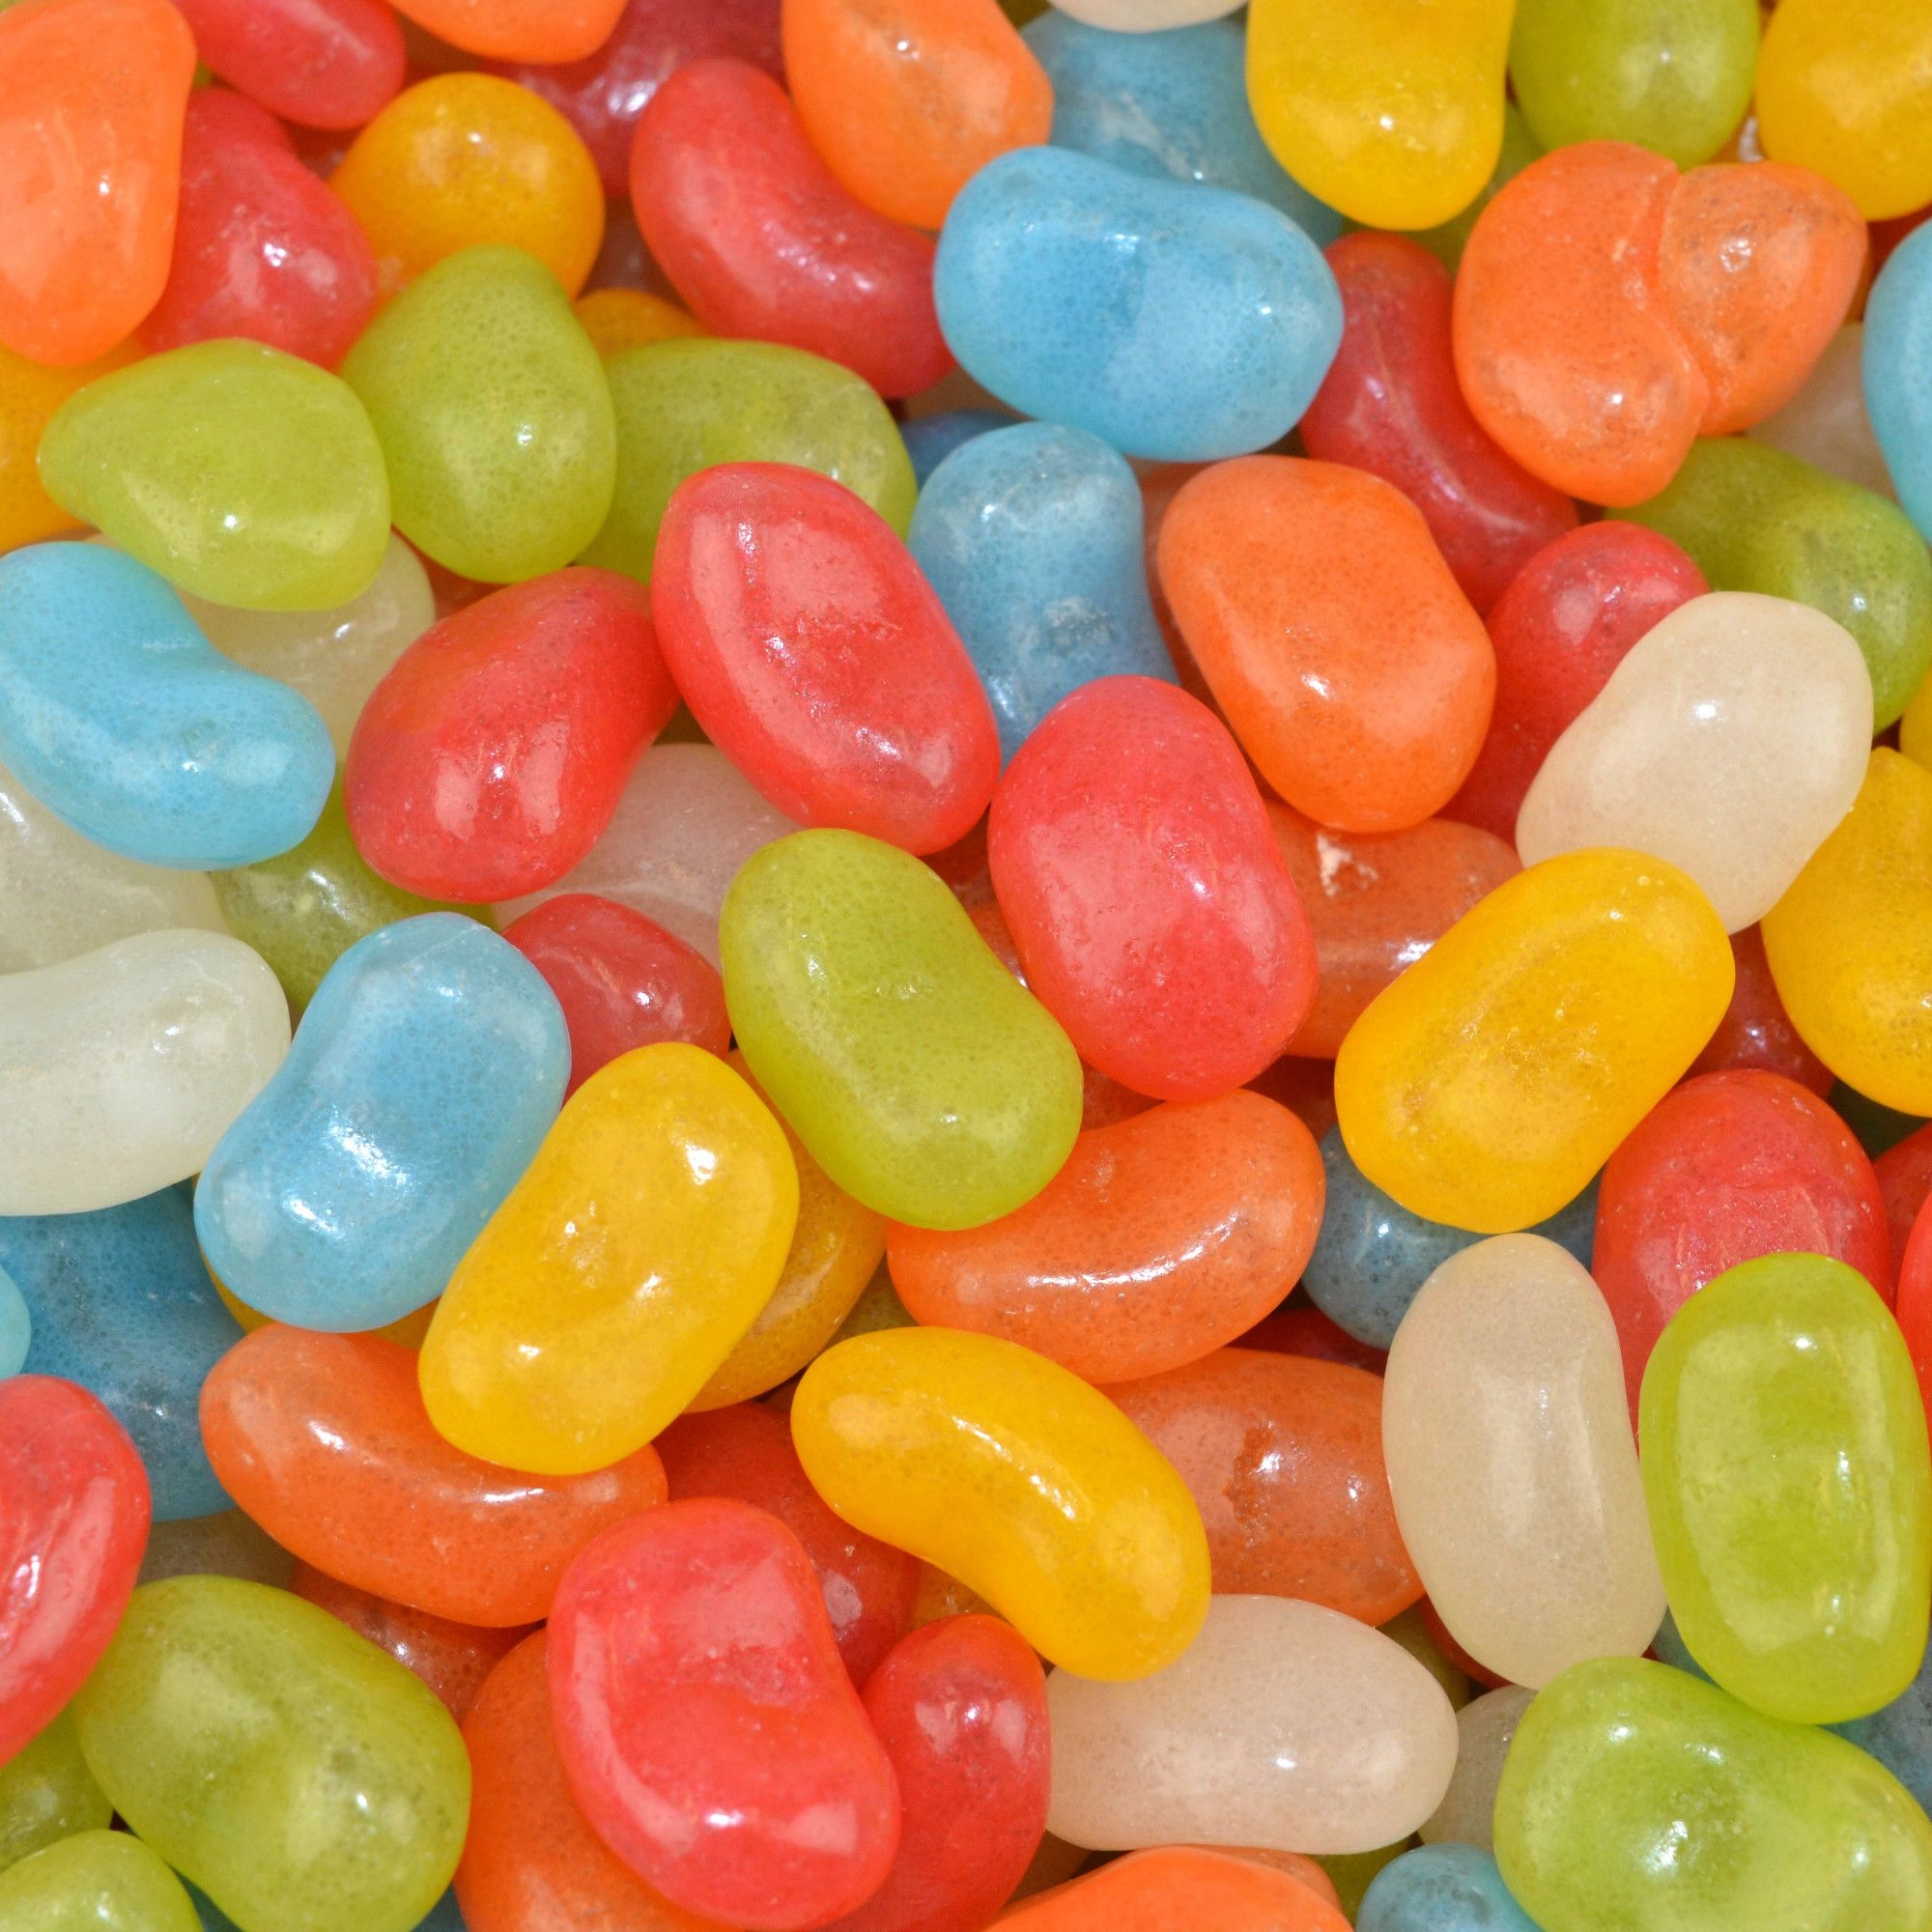 High-end jelly beans, Luxury candy, Premium sweetness, Exquisite confections, 2000x2000 HD Handy